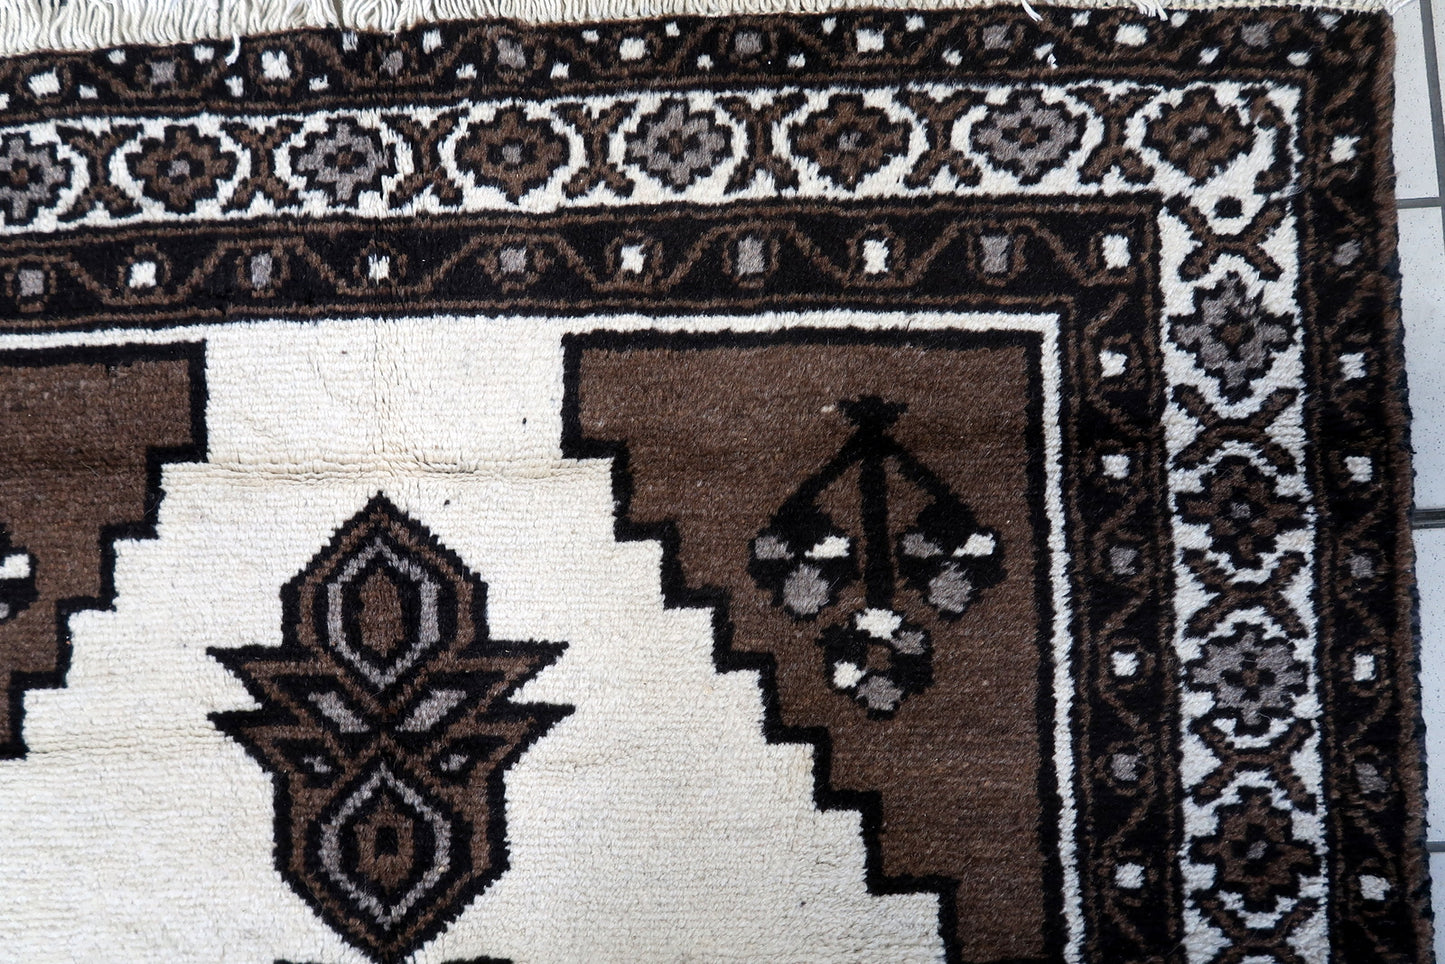 Large Central Geometric Pattern Resembling a Flower or Star on Persian Gabbeh Rug - 1970s